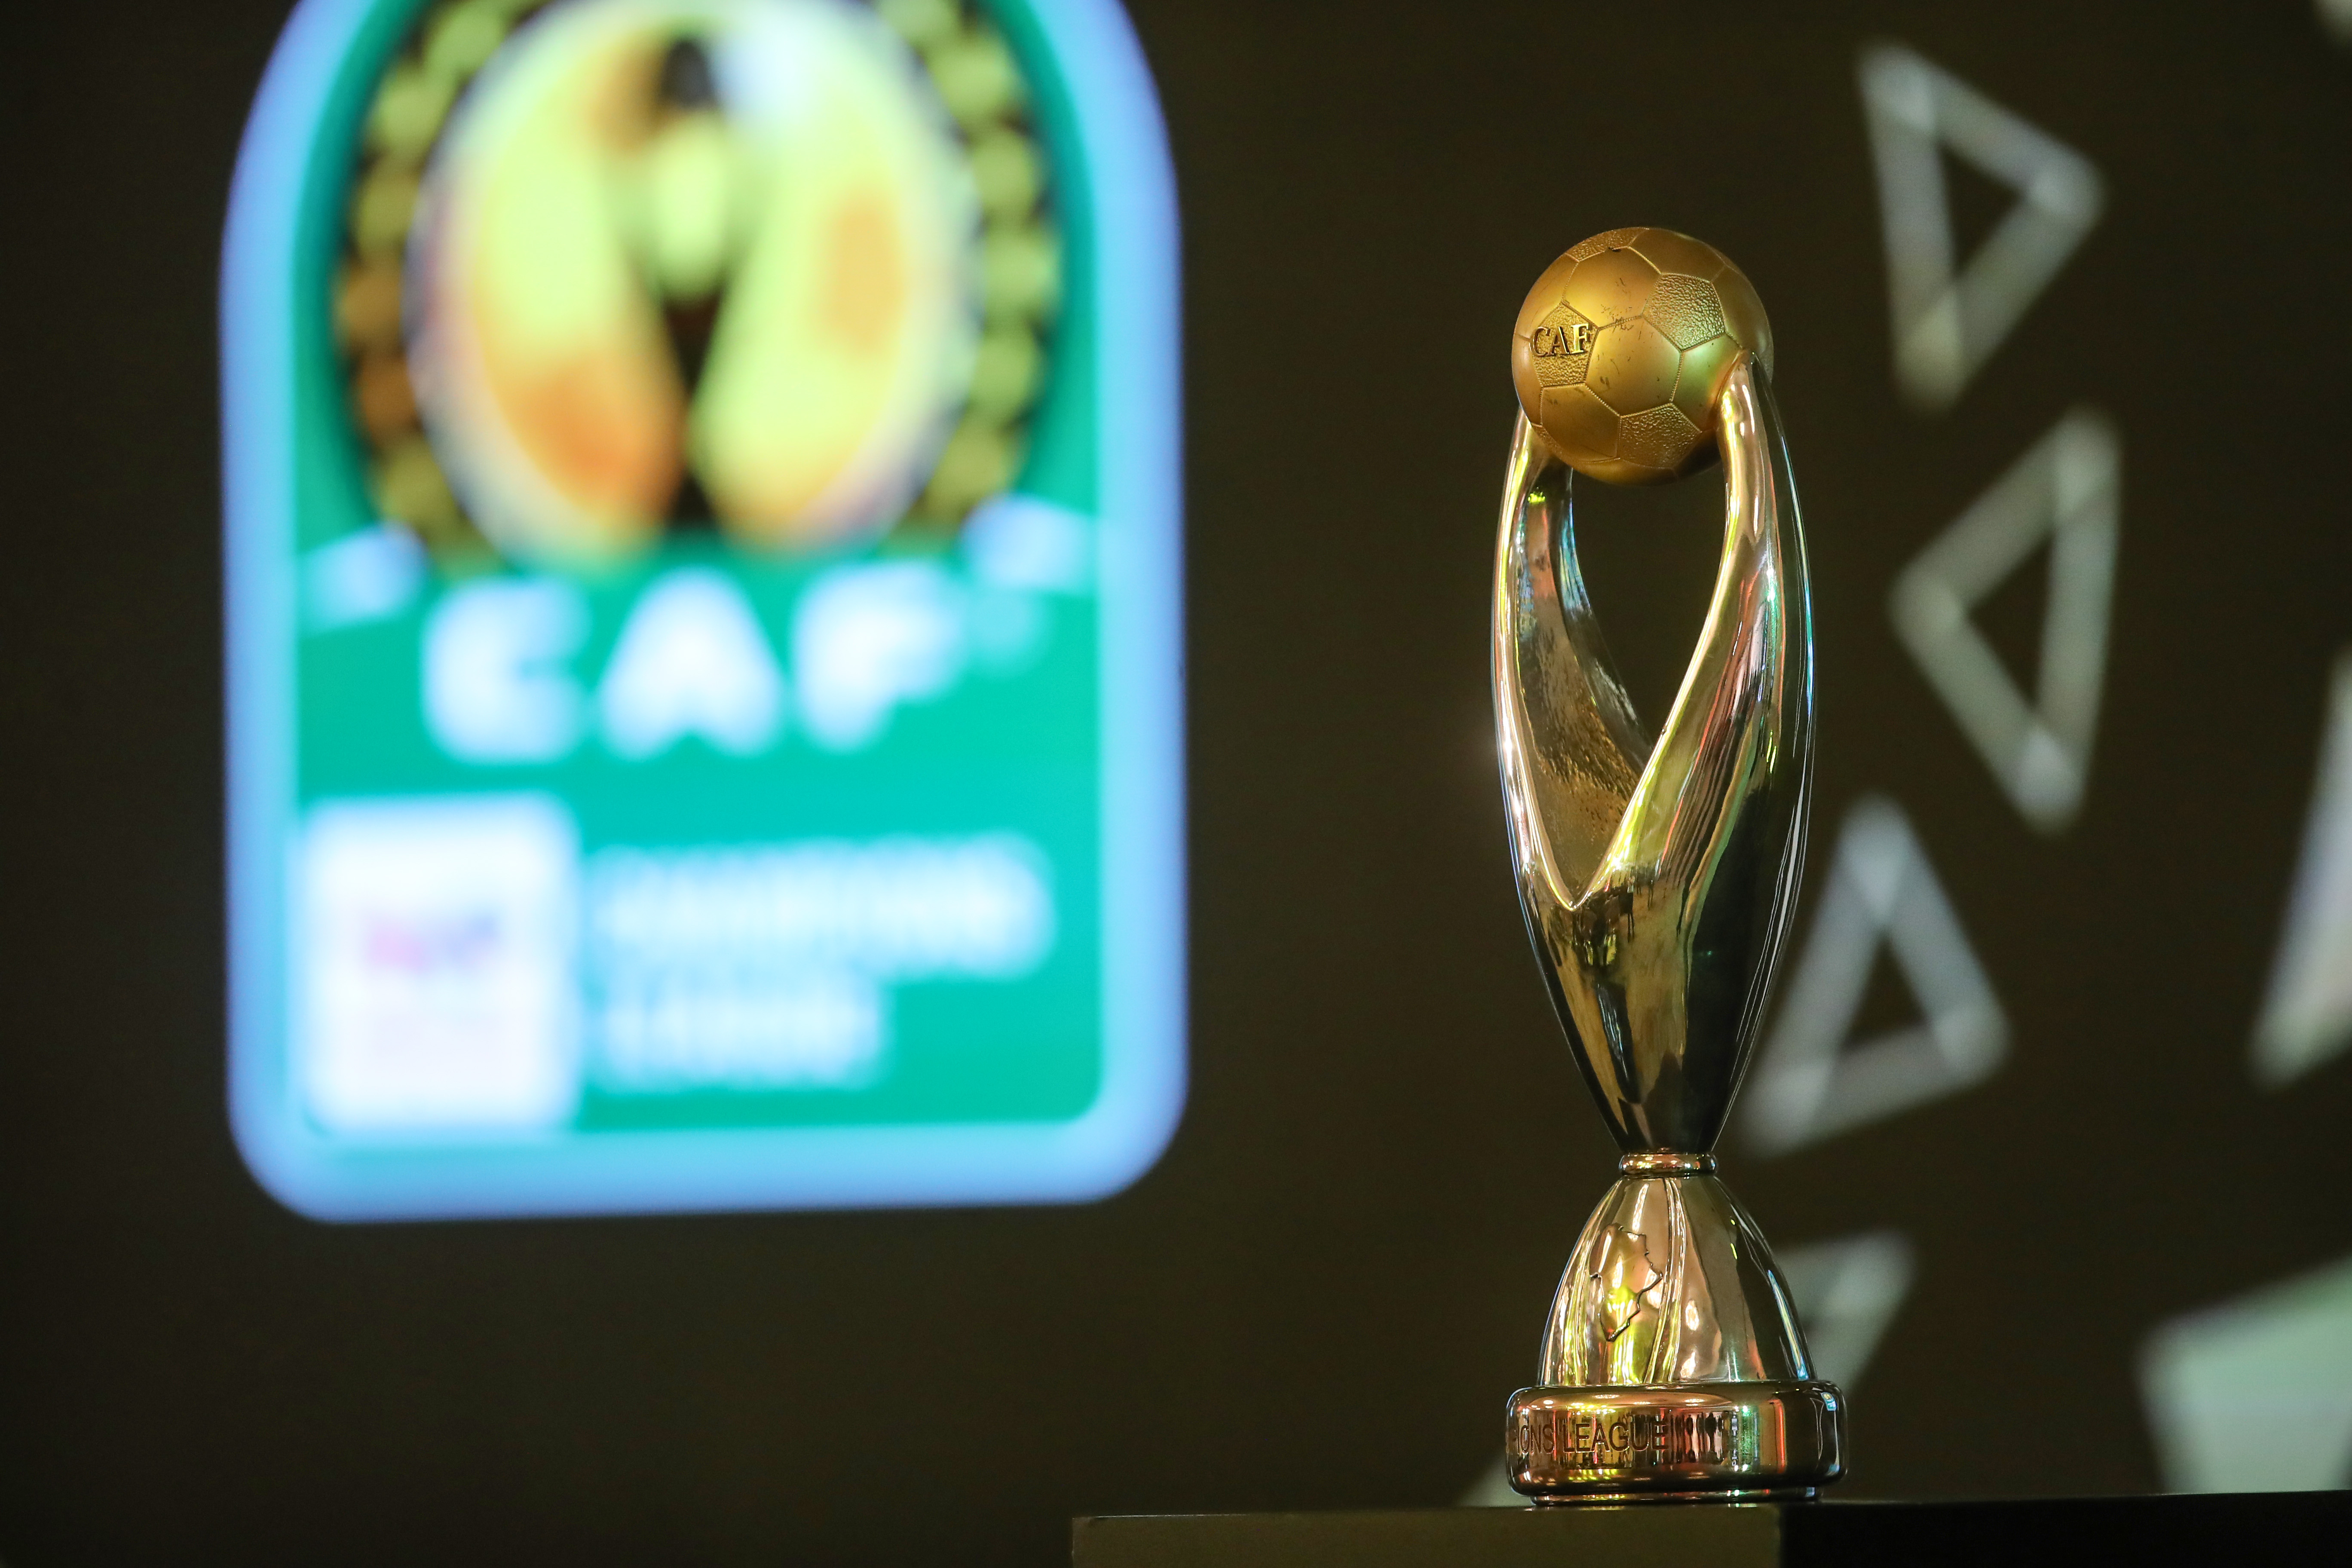 Unprecedented week for Tanzania club football beckons in the TotalEnergies CAF Champions League as CAF confirms Quarter-Finals fixture dates, KO times
